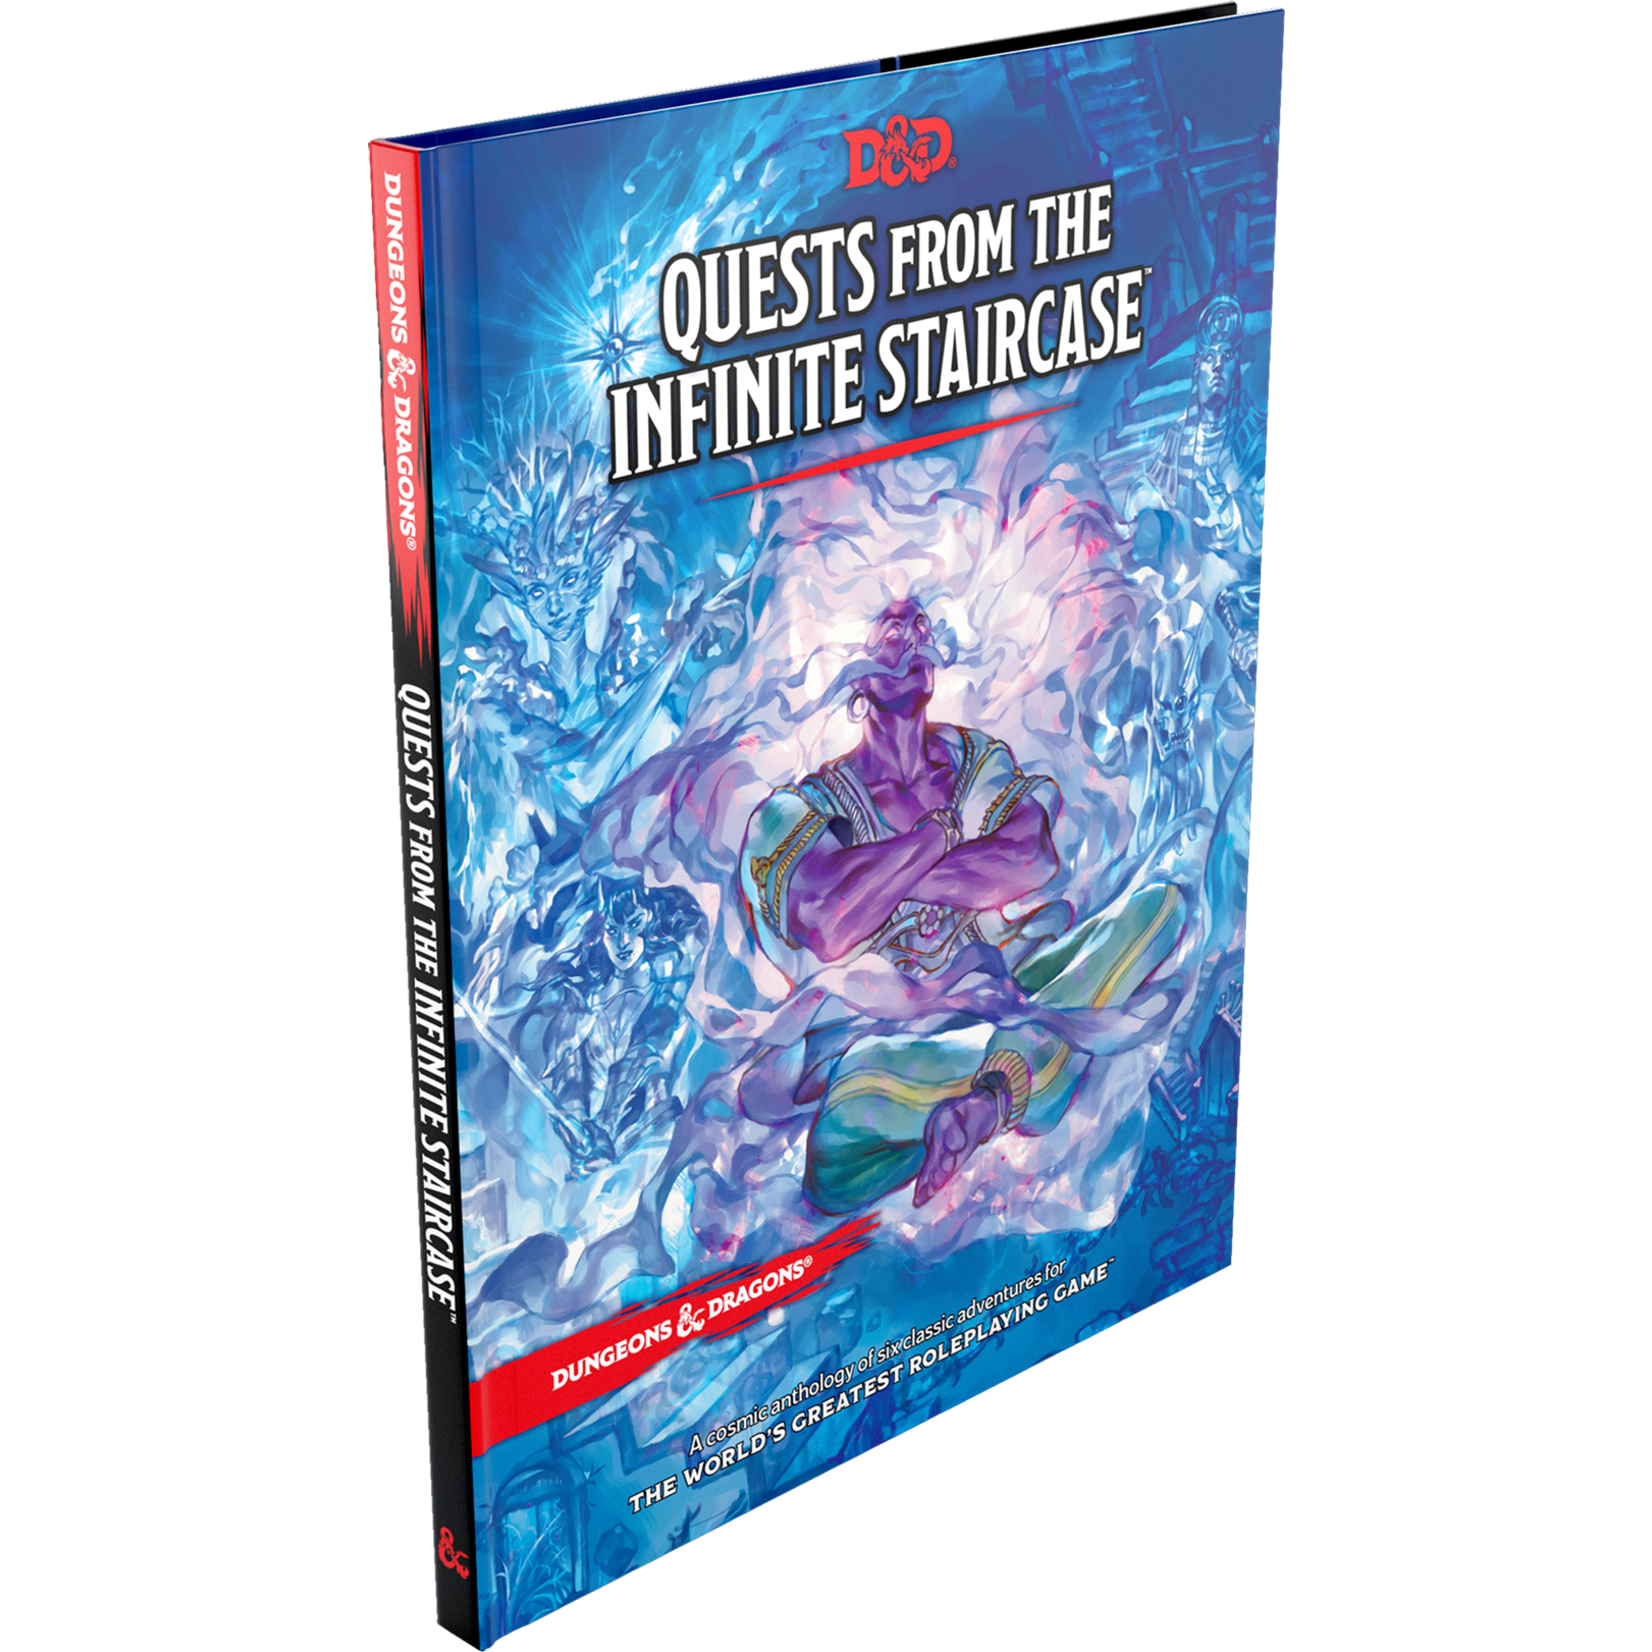 Dungeons & Dragons Dungeons & Dragons – Quests from the Infinite Staircase